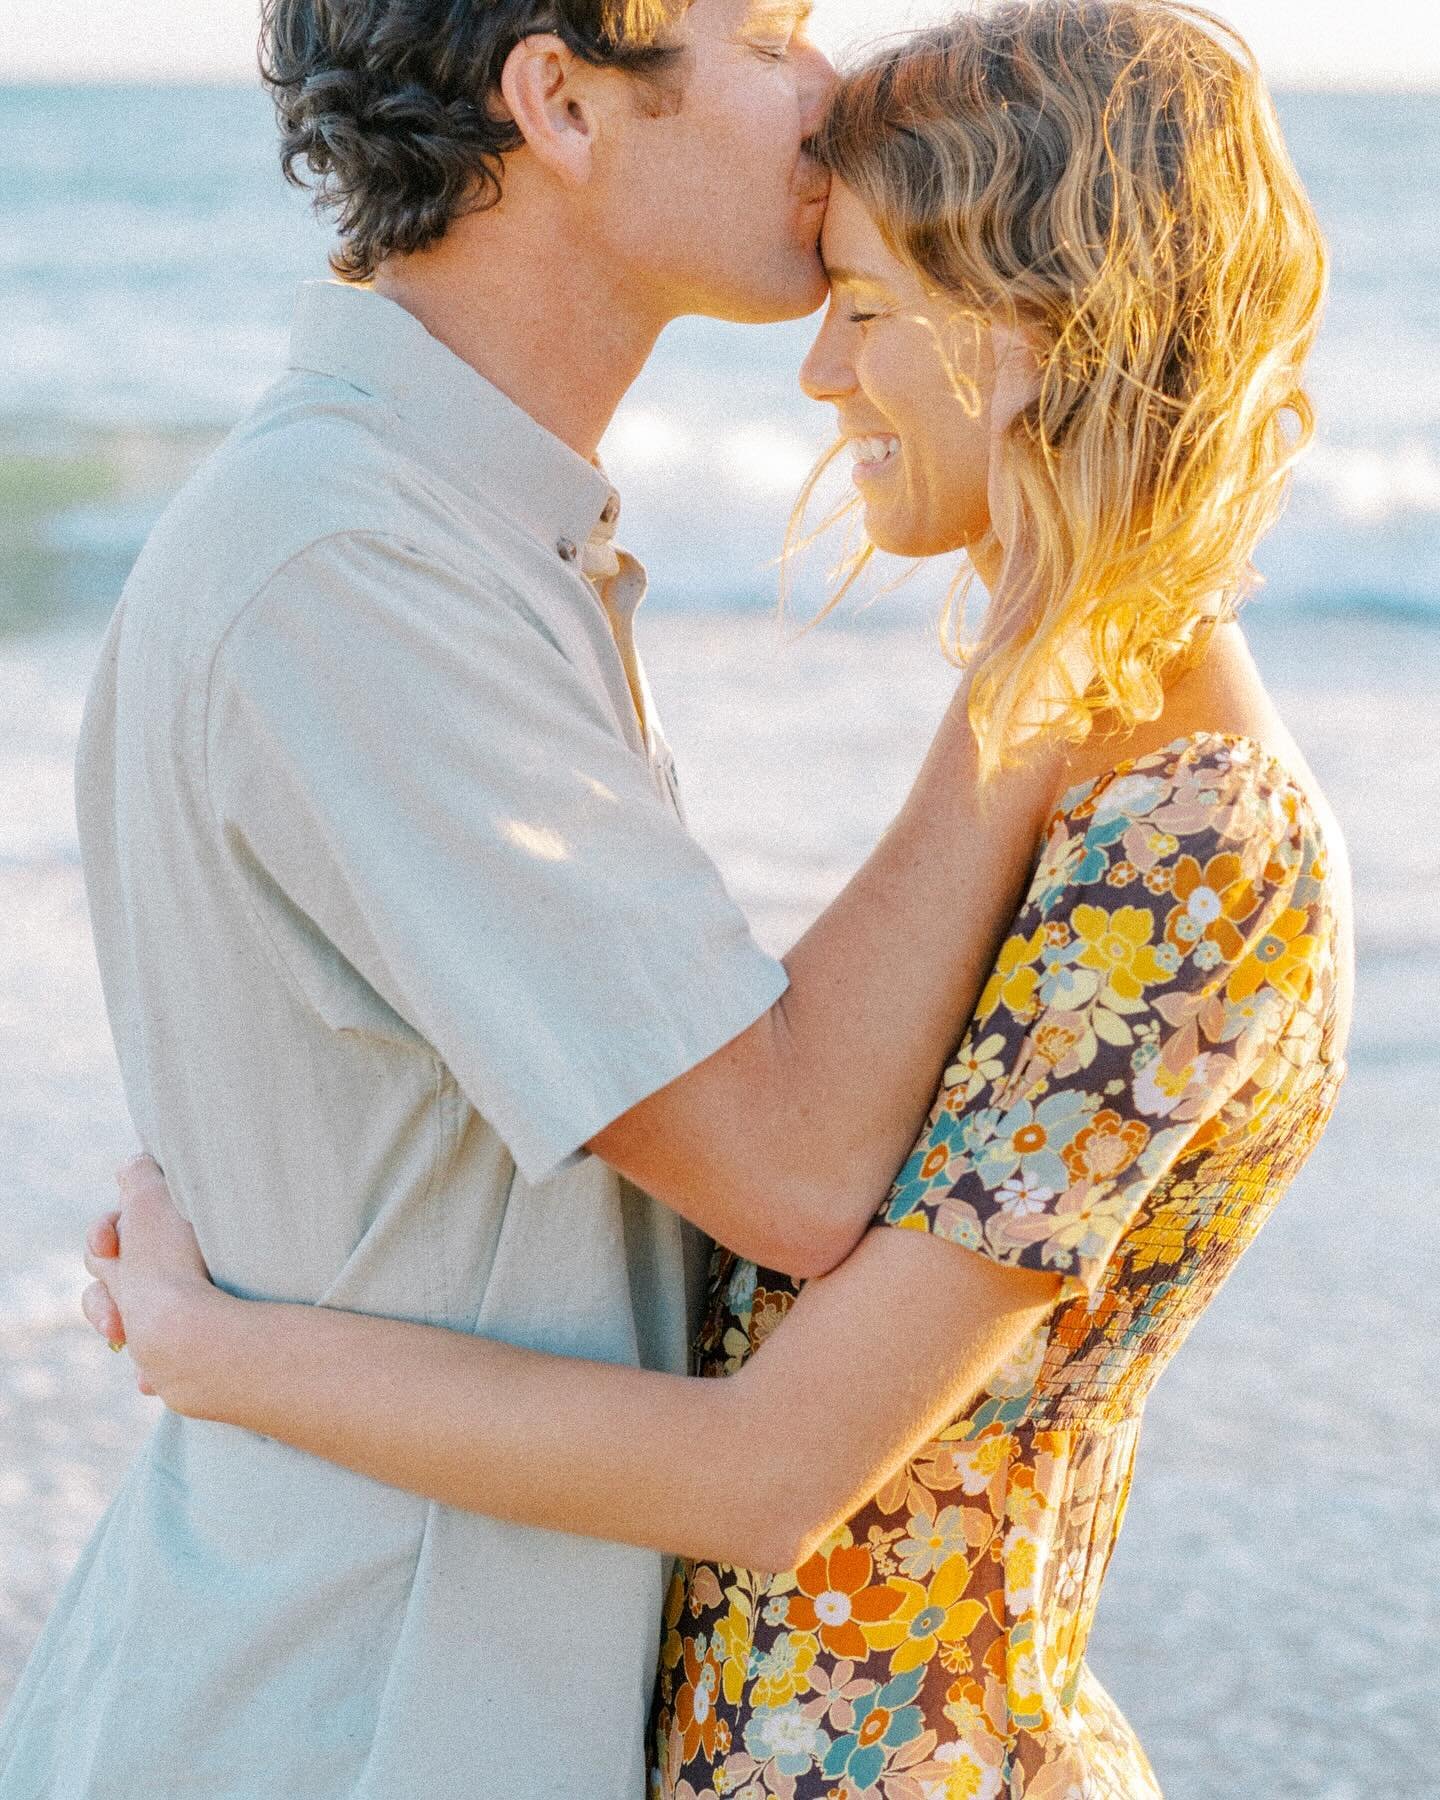 Nothing but the sweetest smiles and laughters during K&amp;K engagement session on the coast:) can&rsquo;t wait for wedding day 🥰